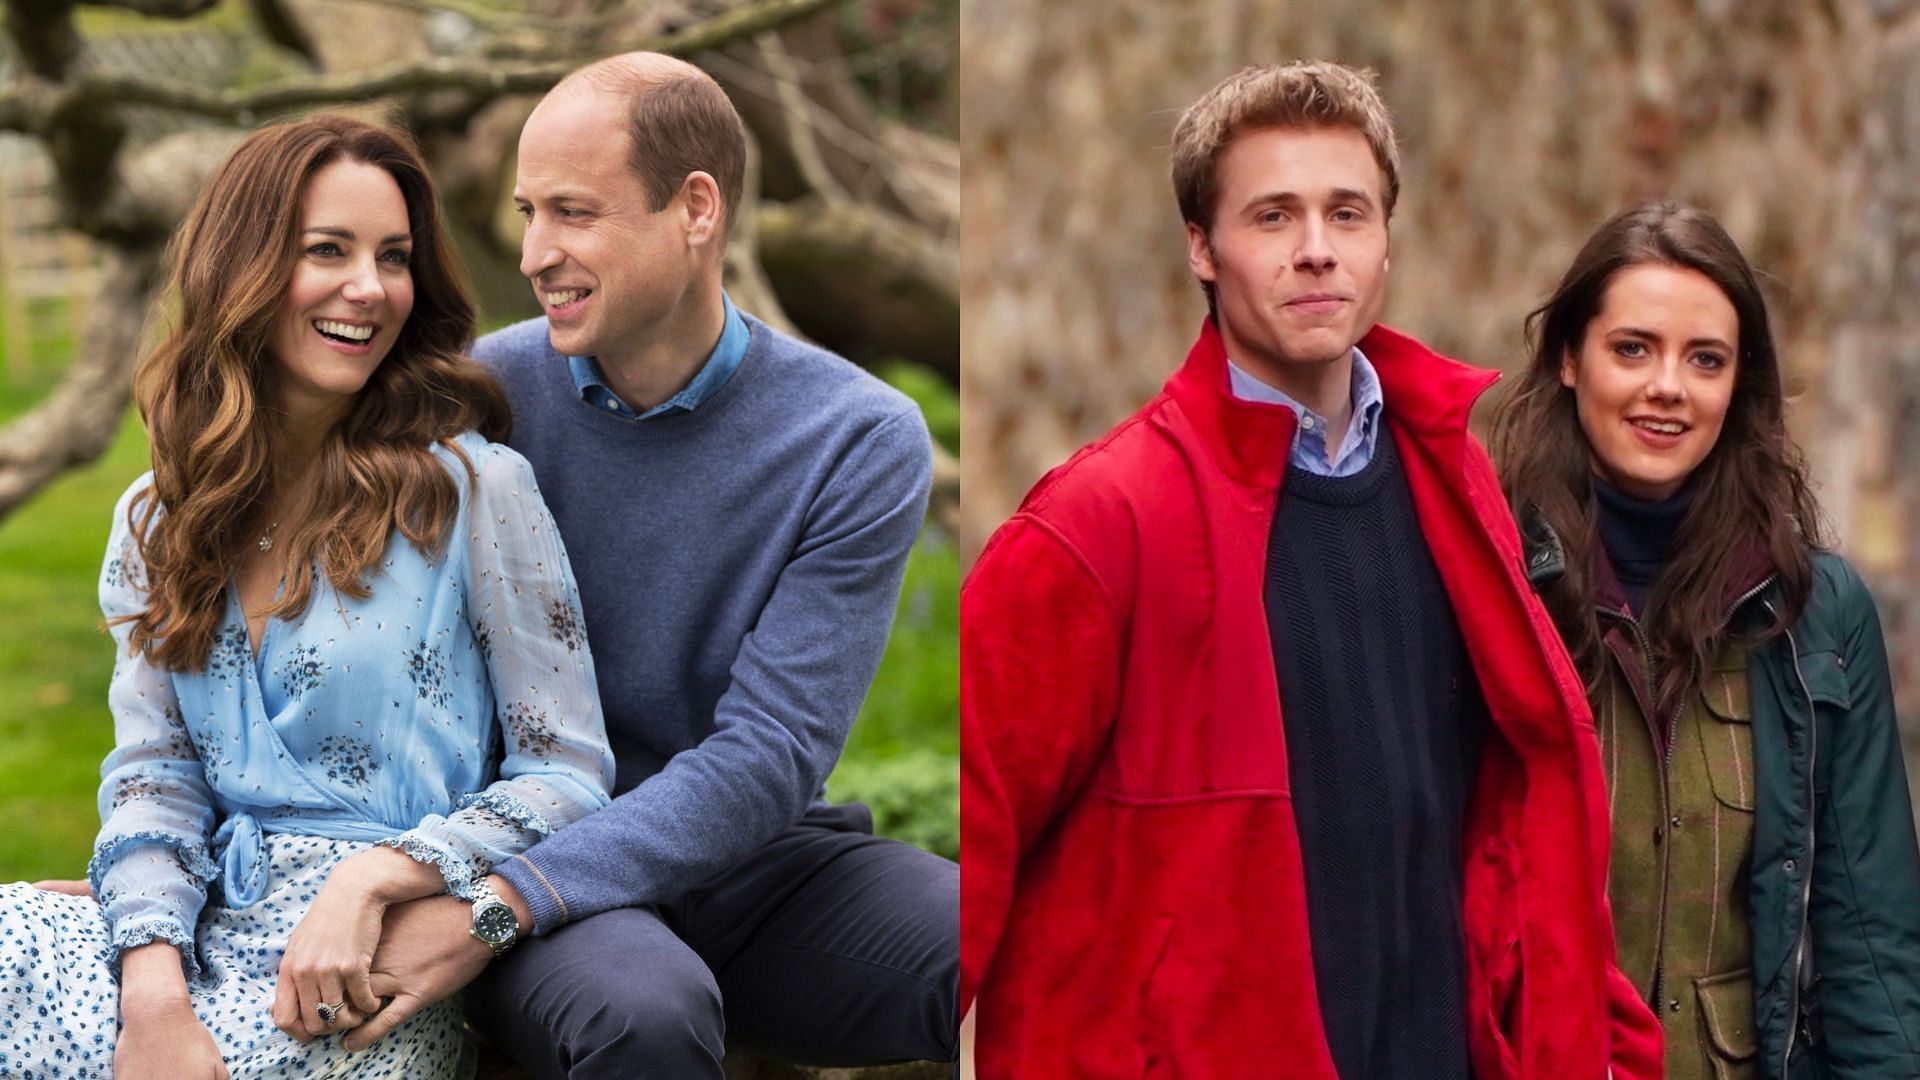 (L) Princess Kate and Prince William and their (R) The Crown version (Images via Chris Floyd and Netflix)